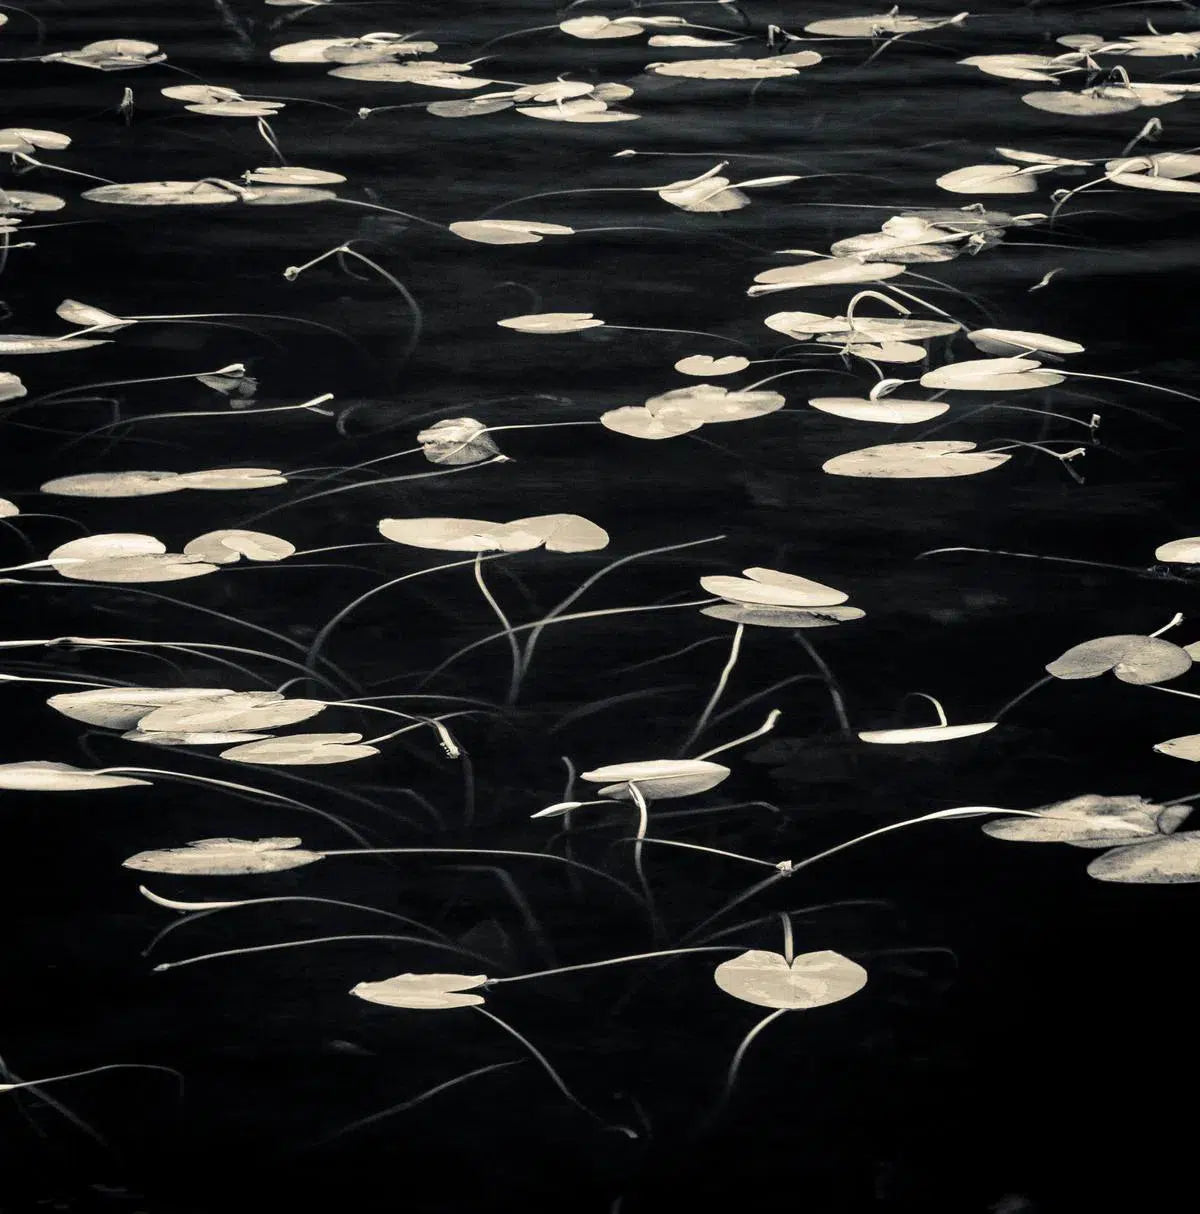 Lily pads II, by Robert Canis-PurePhoto